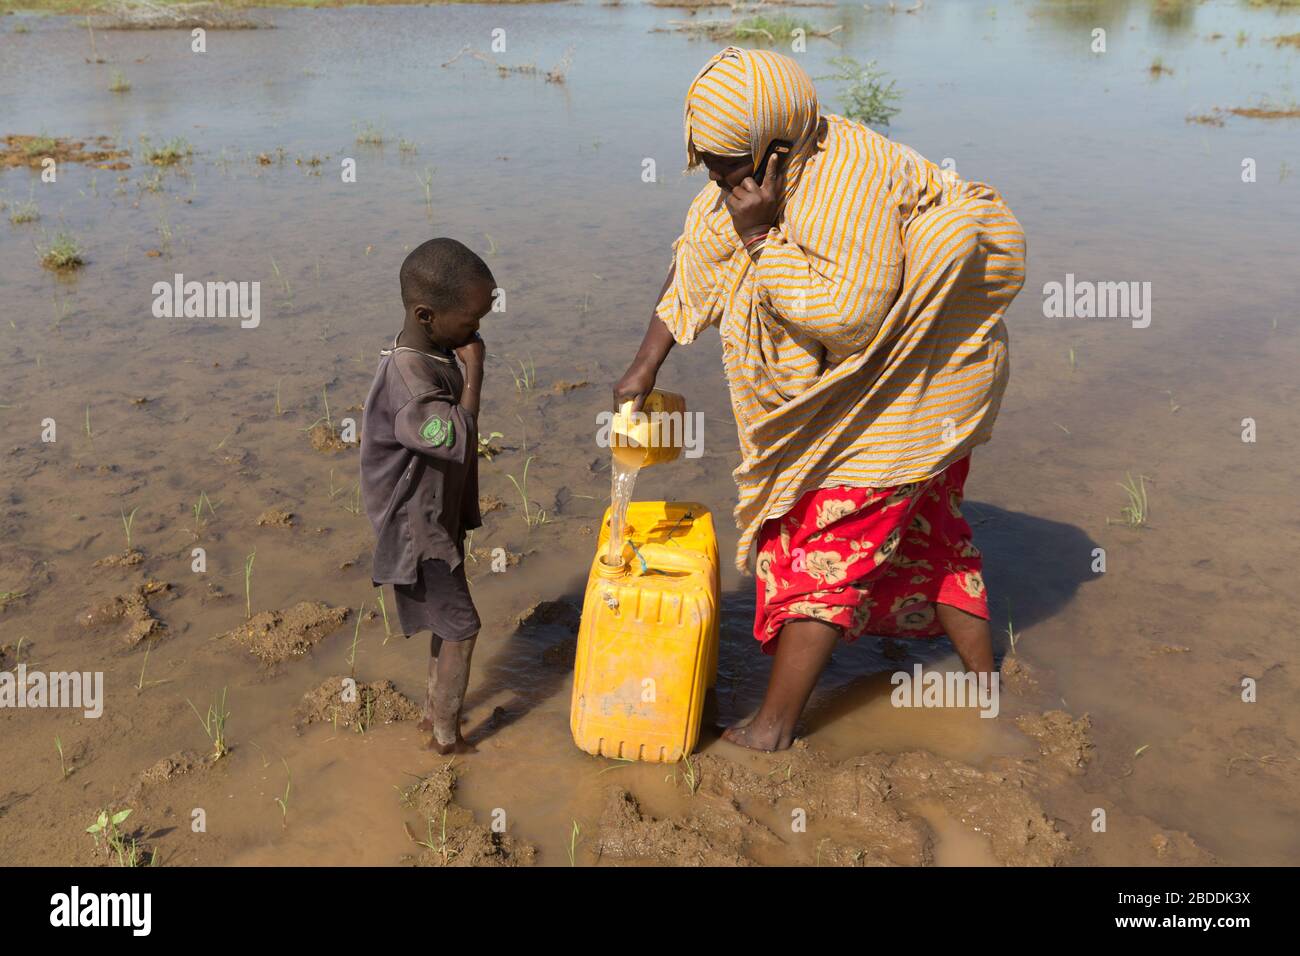 14.11.2019, Gode, Somali Region, Ethiopia - A woman scoops water from a natural water source into a water canister. She is talking on her mobile phone Stock Photo